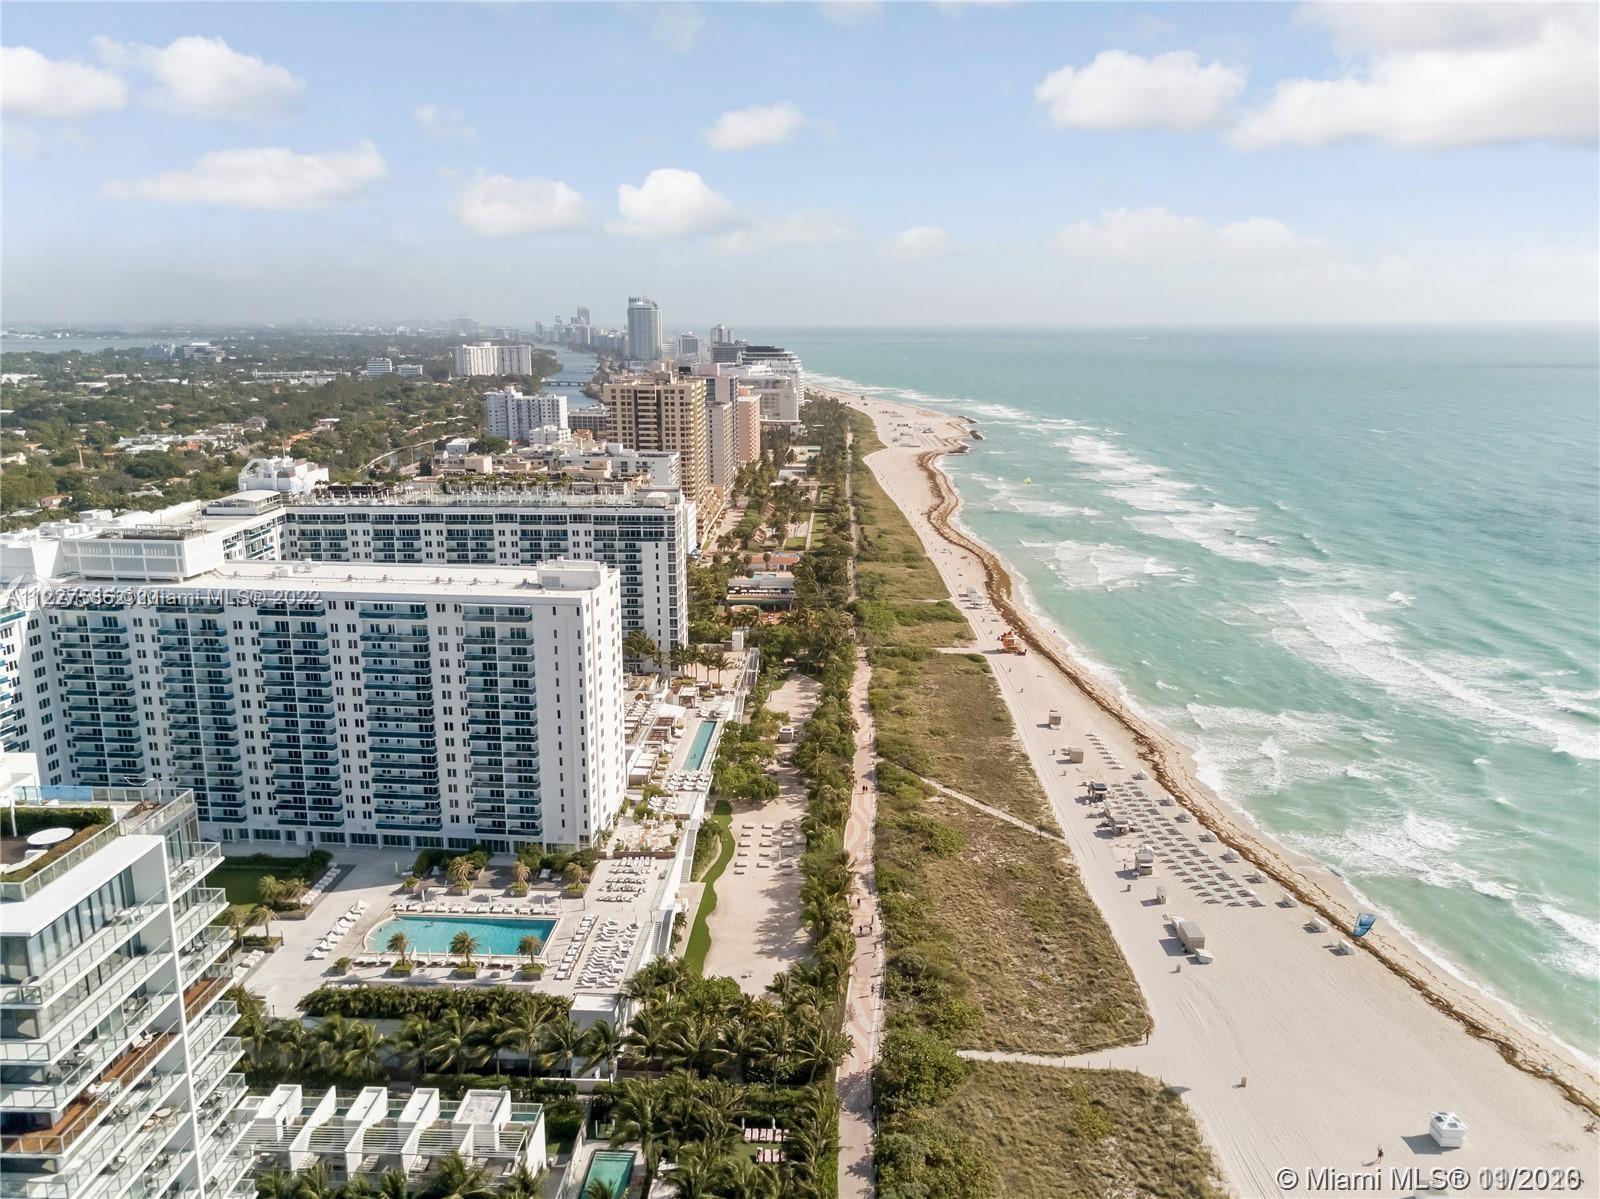 1 BED 1 BATH, FOR SALE AT RONEY PALACE CONDO IN SOUTH BEACH
 760 sq. ft. The Roney shares the fines